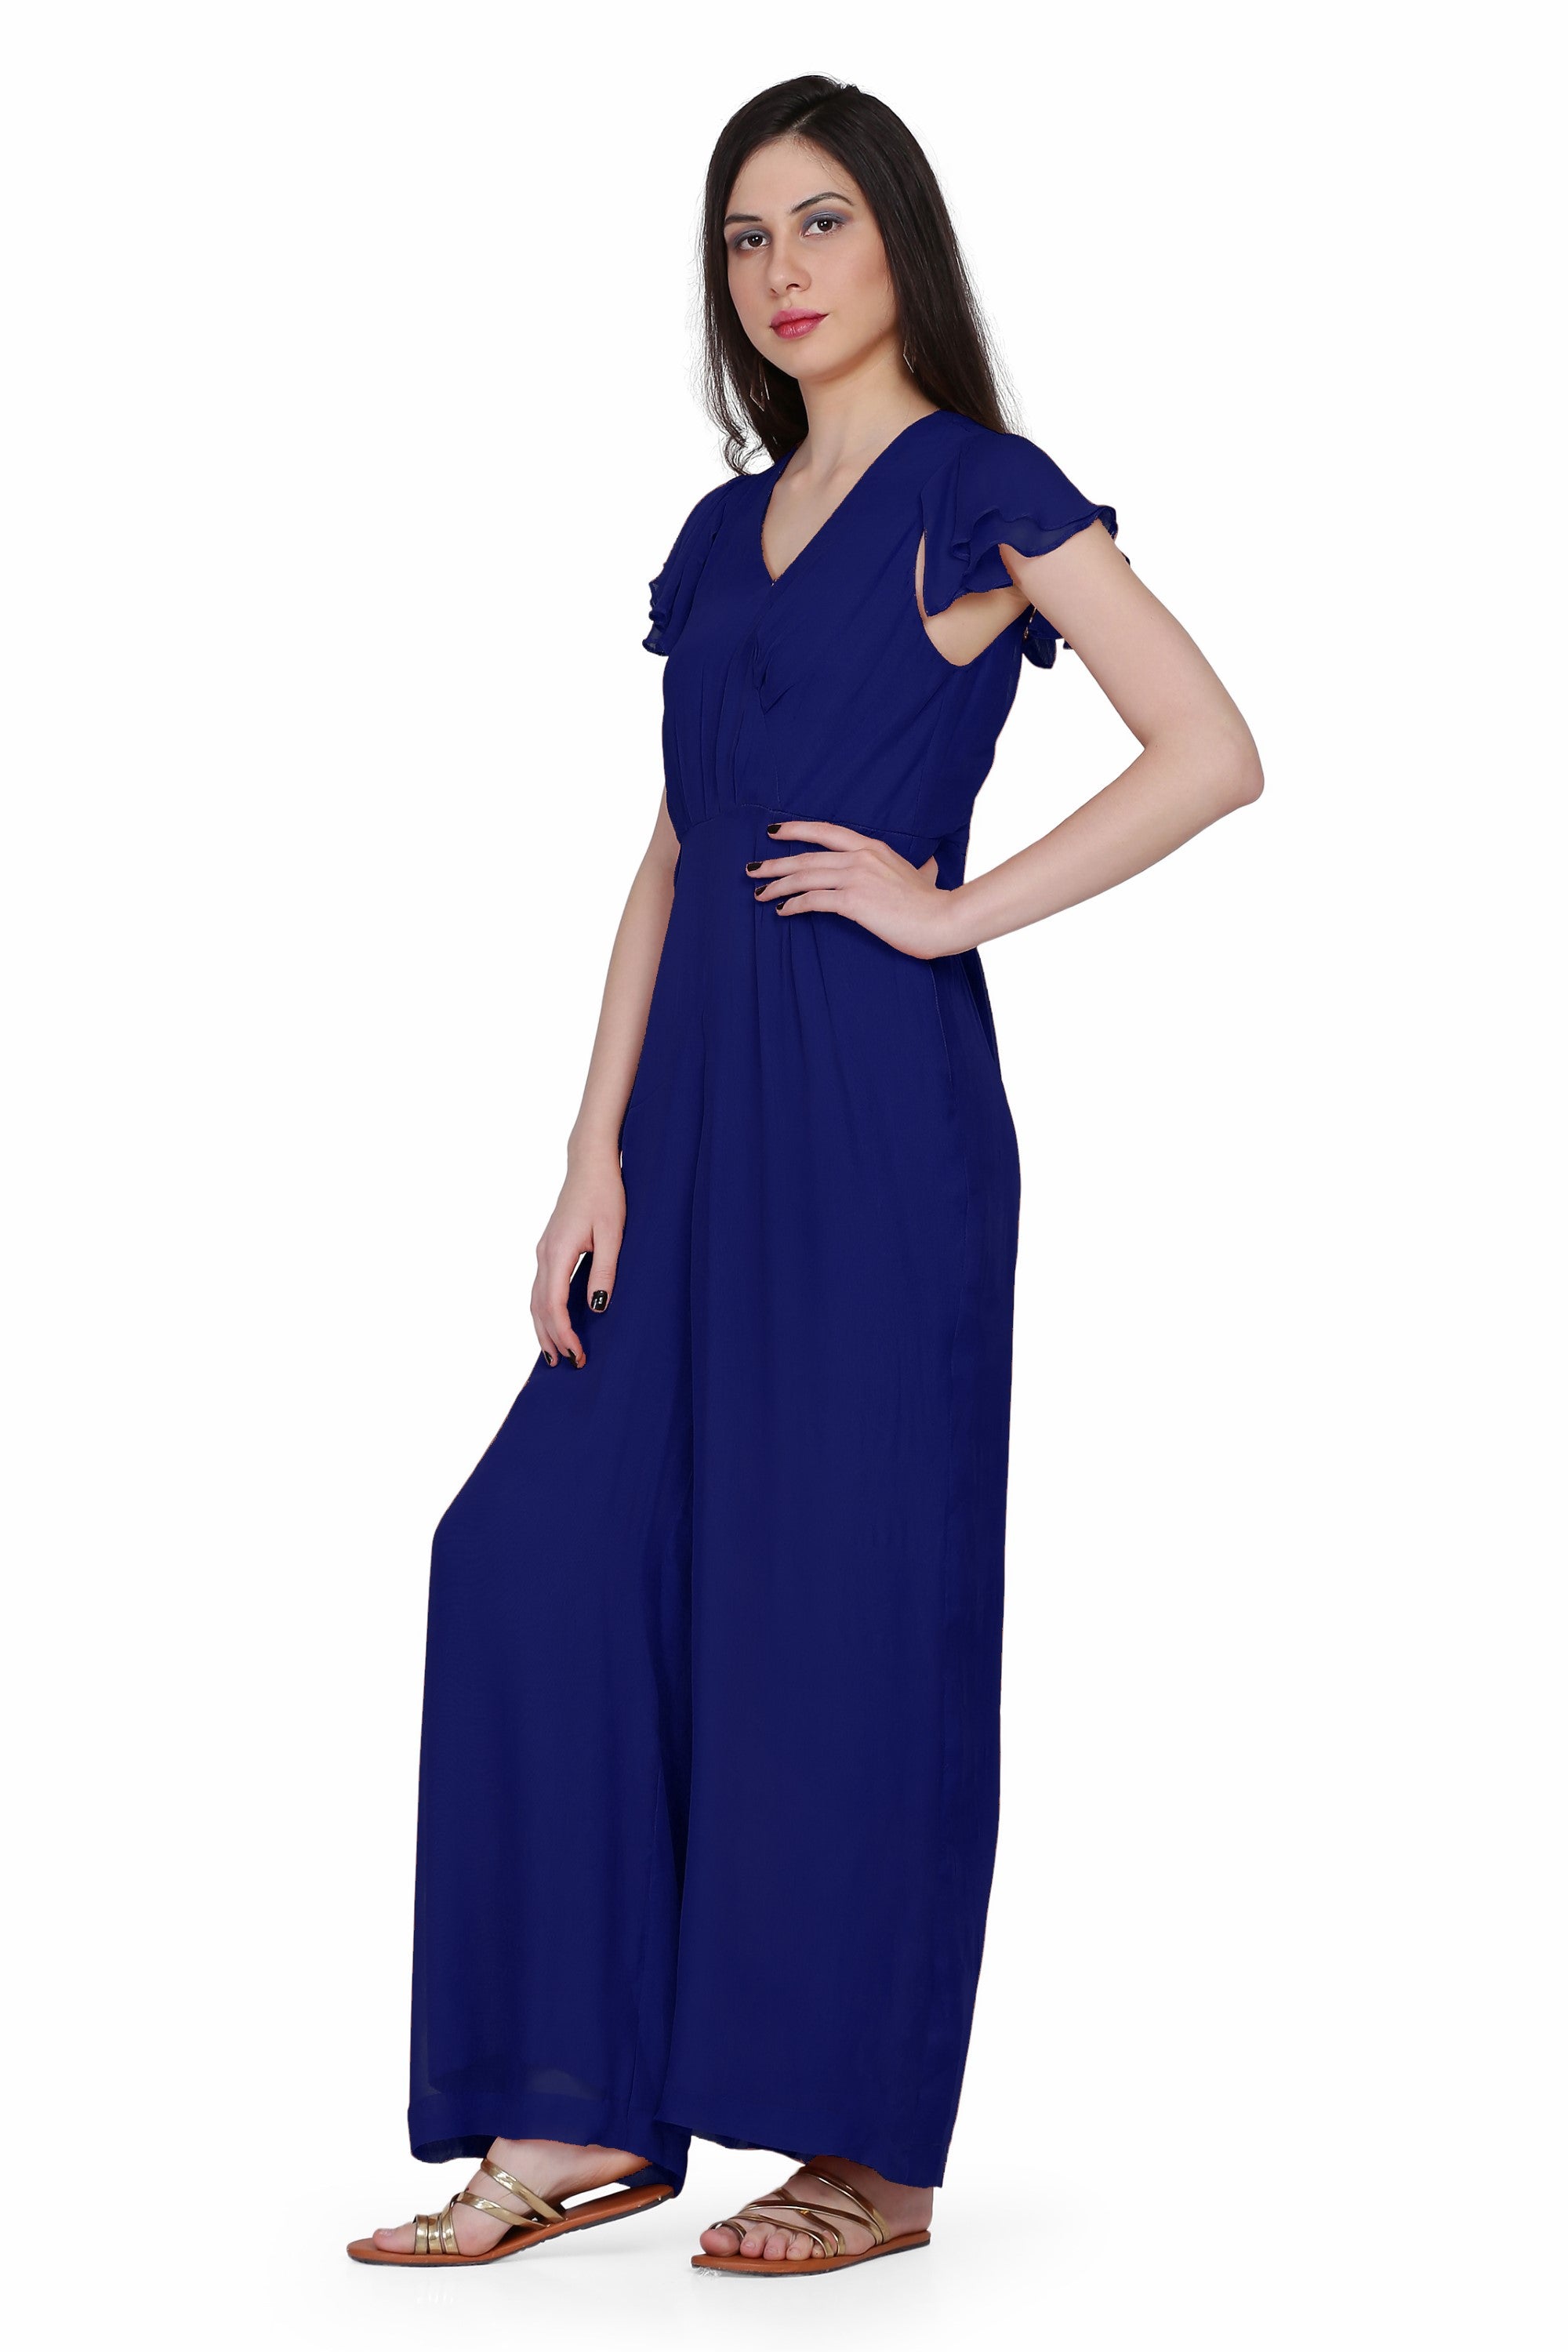 Women's Drape Party/ Casual Jumpsuit In Dark Blue - MIRACOLOS by Ruchi